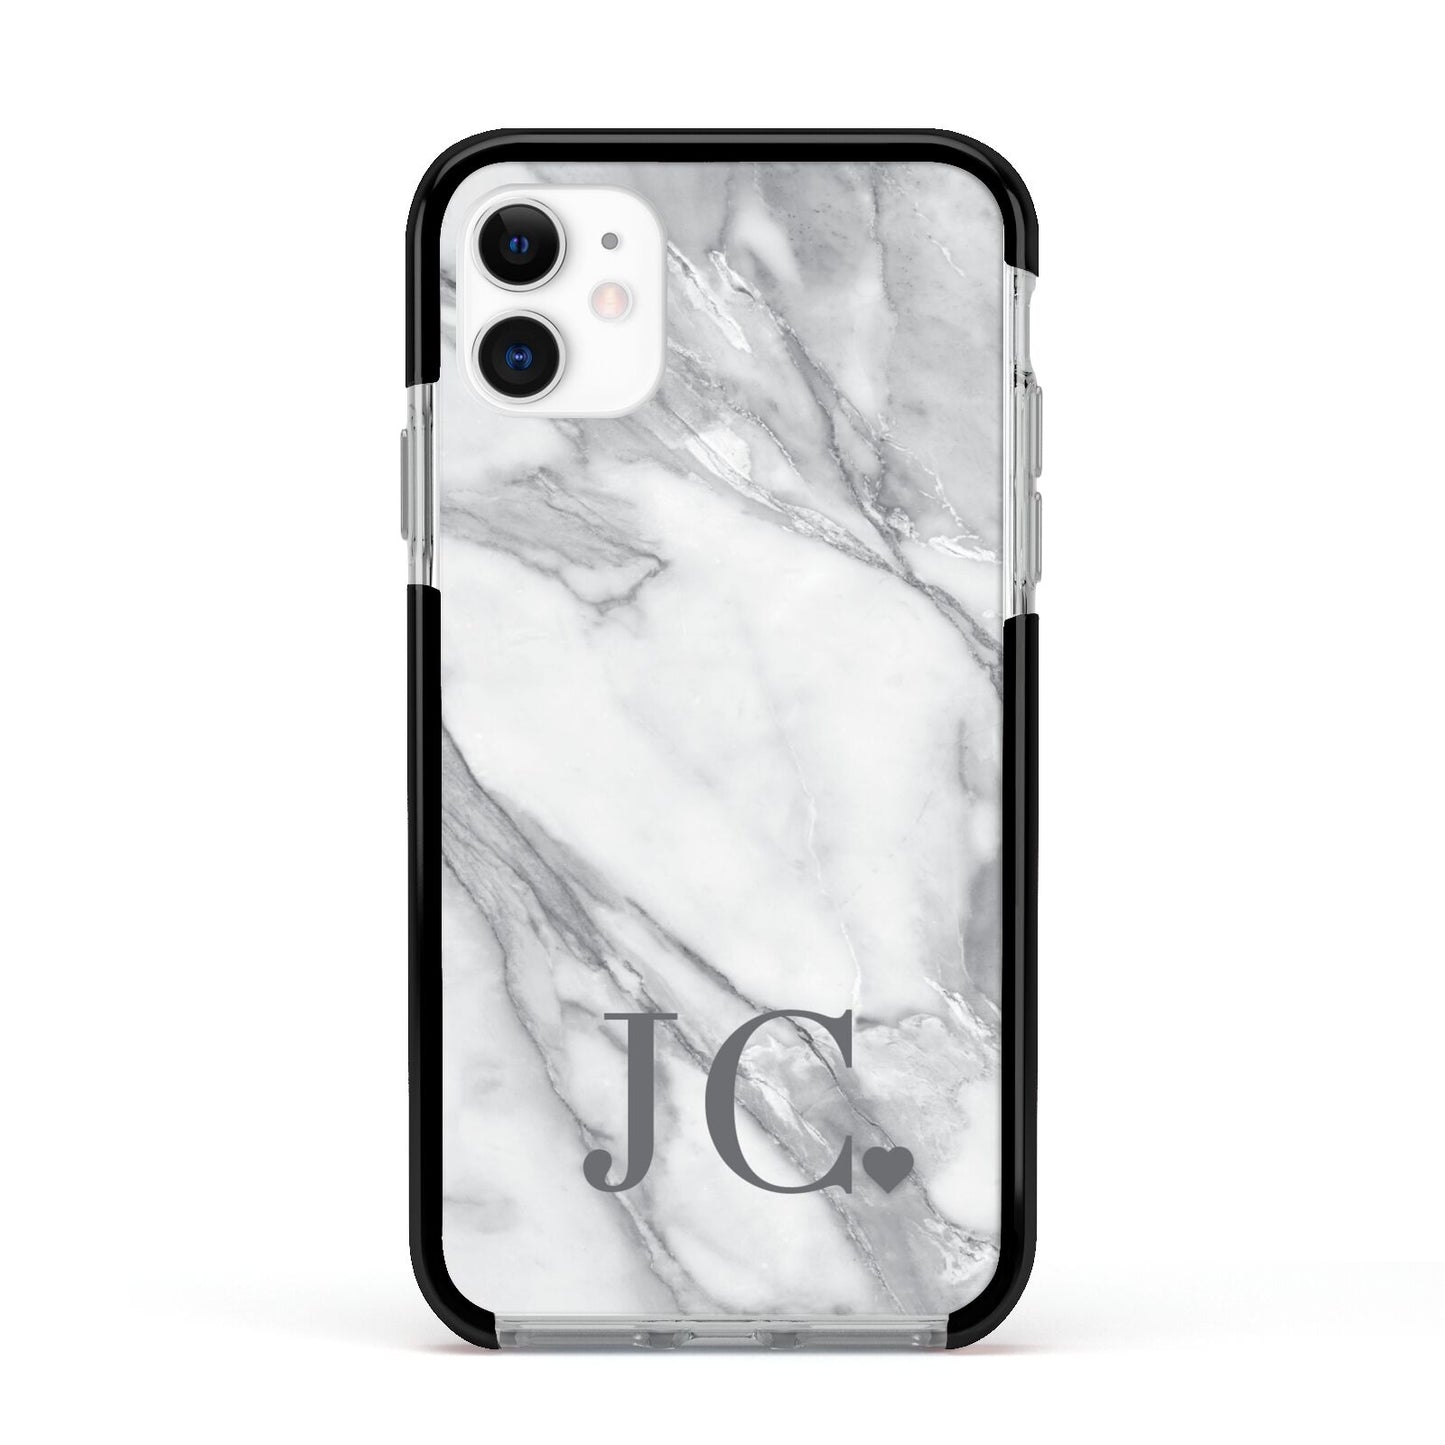 Initials Love Heart Apple iPhone 11 in White with Black Impact Case